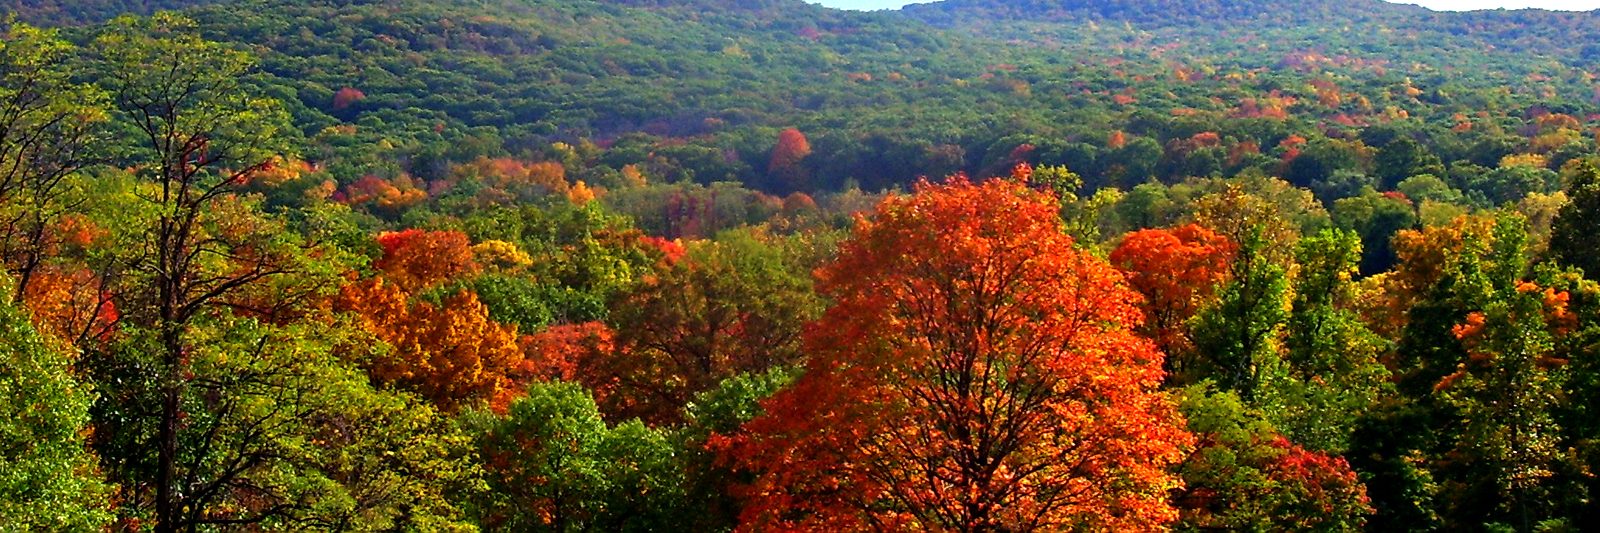 Things to Do in the Laurel Highlands